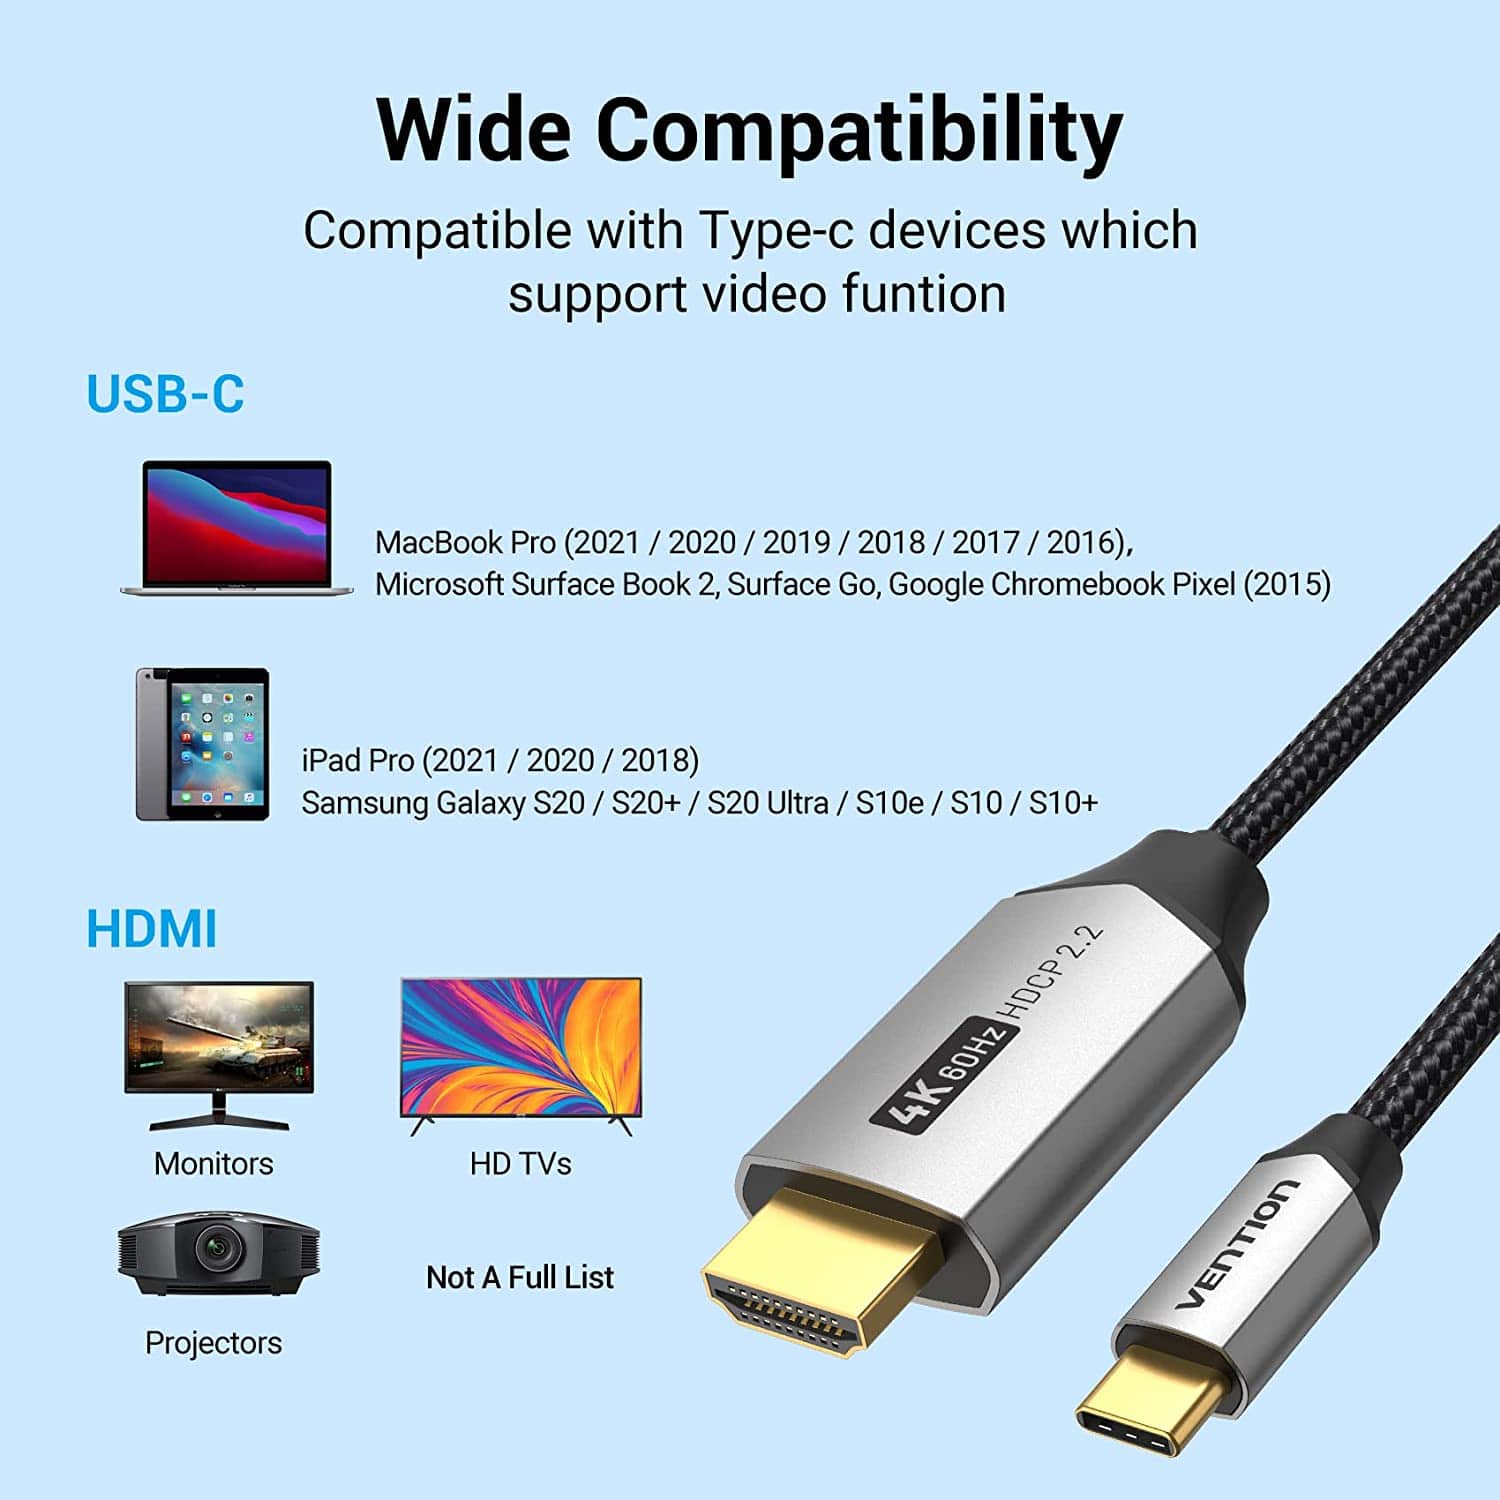 USB to HDMI Adapter Cable Cord - USB 2.0 Type A Male to HDMI Male Charging  Converter (Only for Charging) (1.5 Meter)